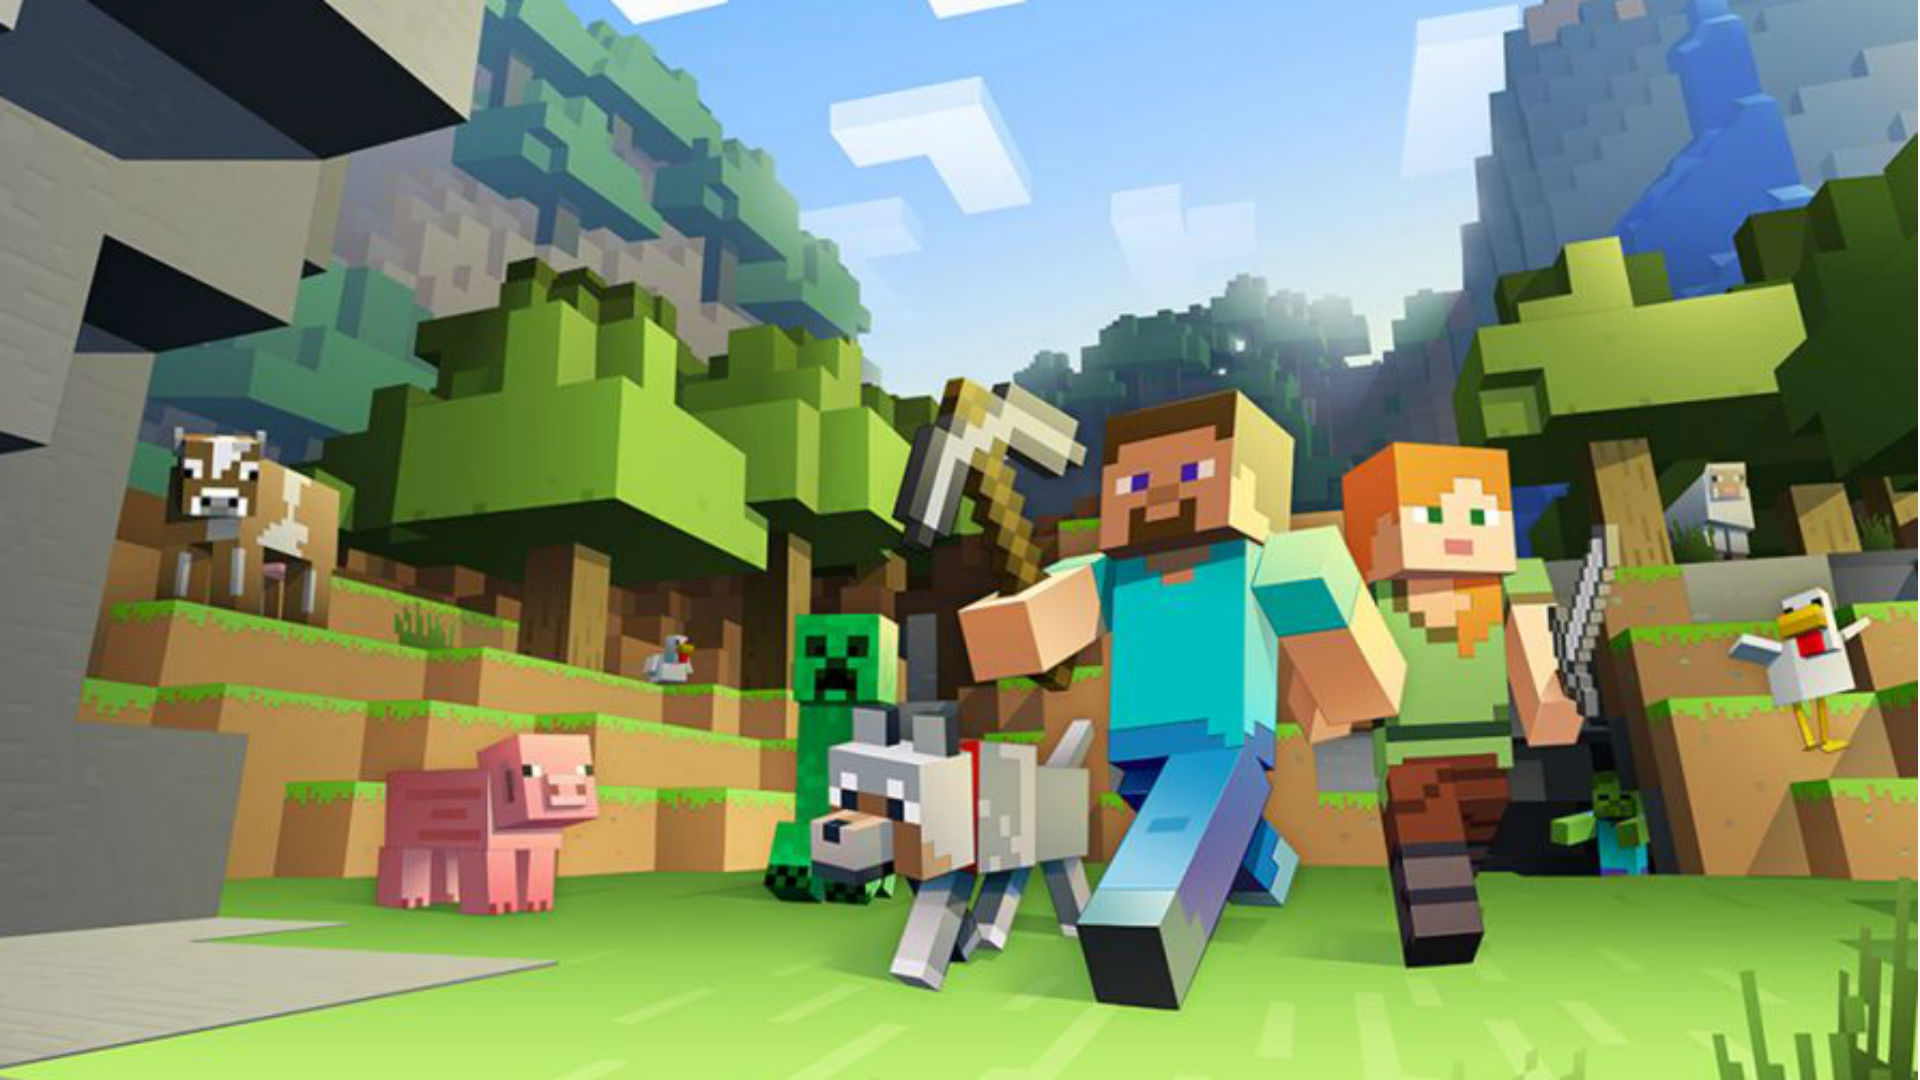 Minecraft Festival is the latest event